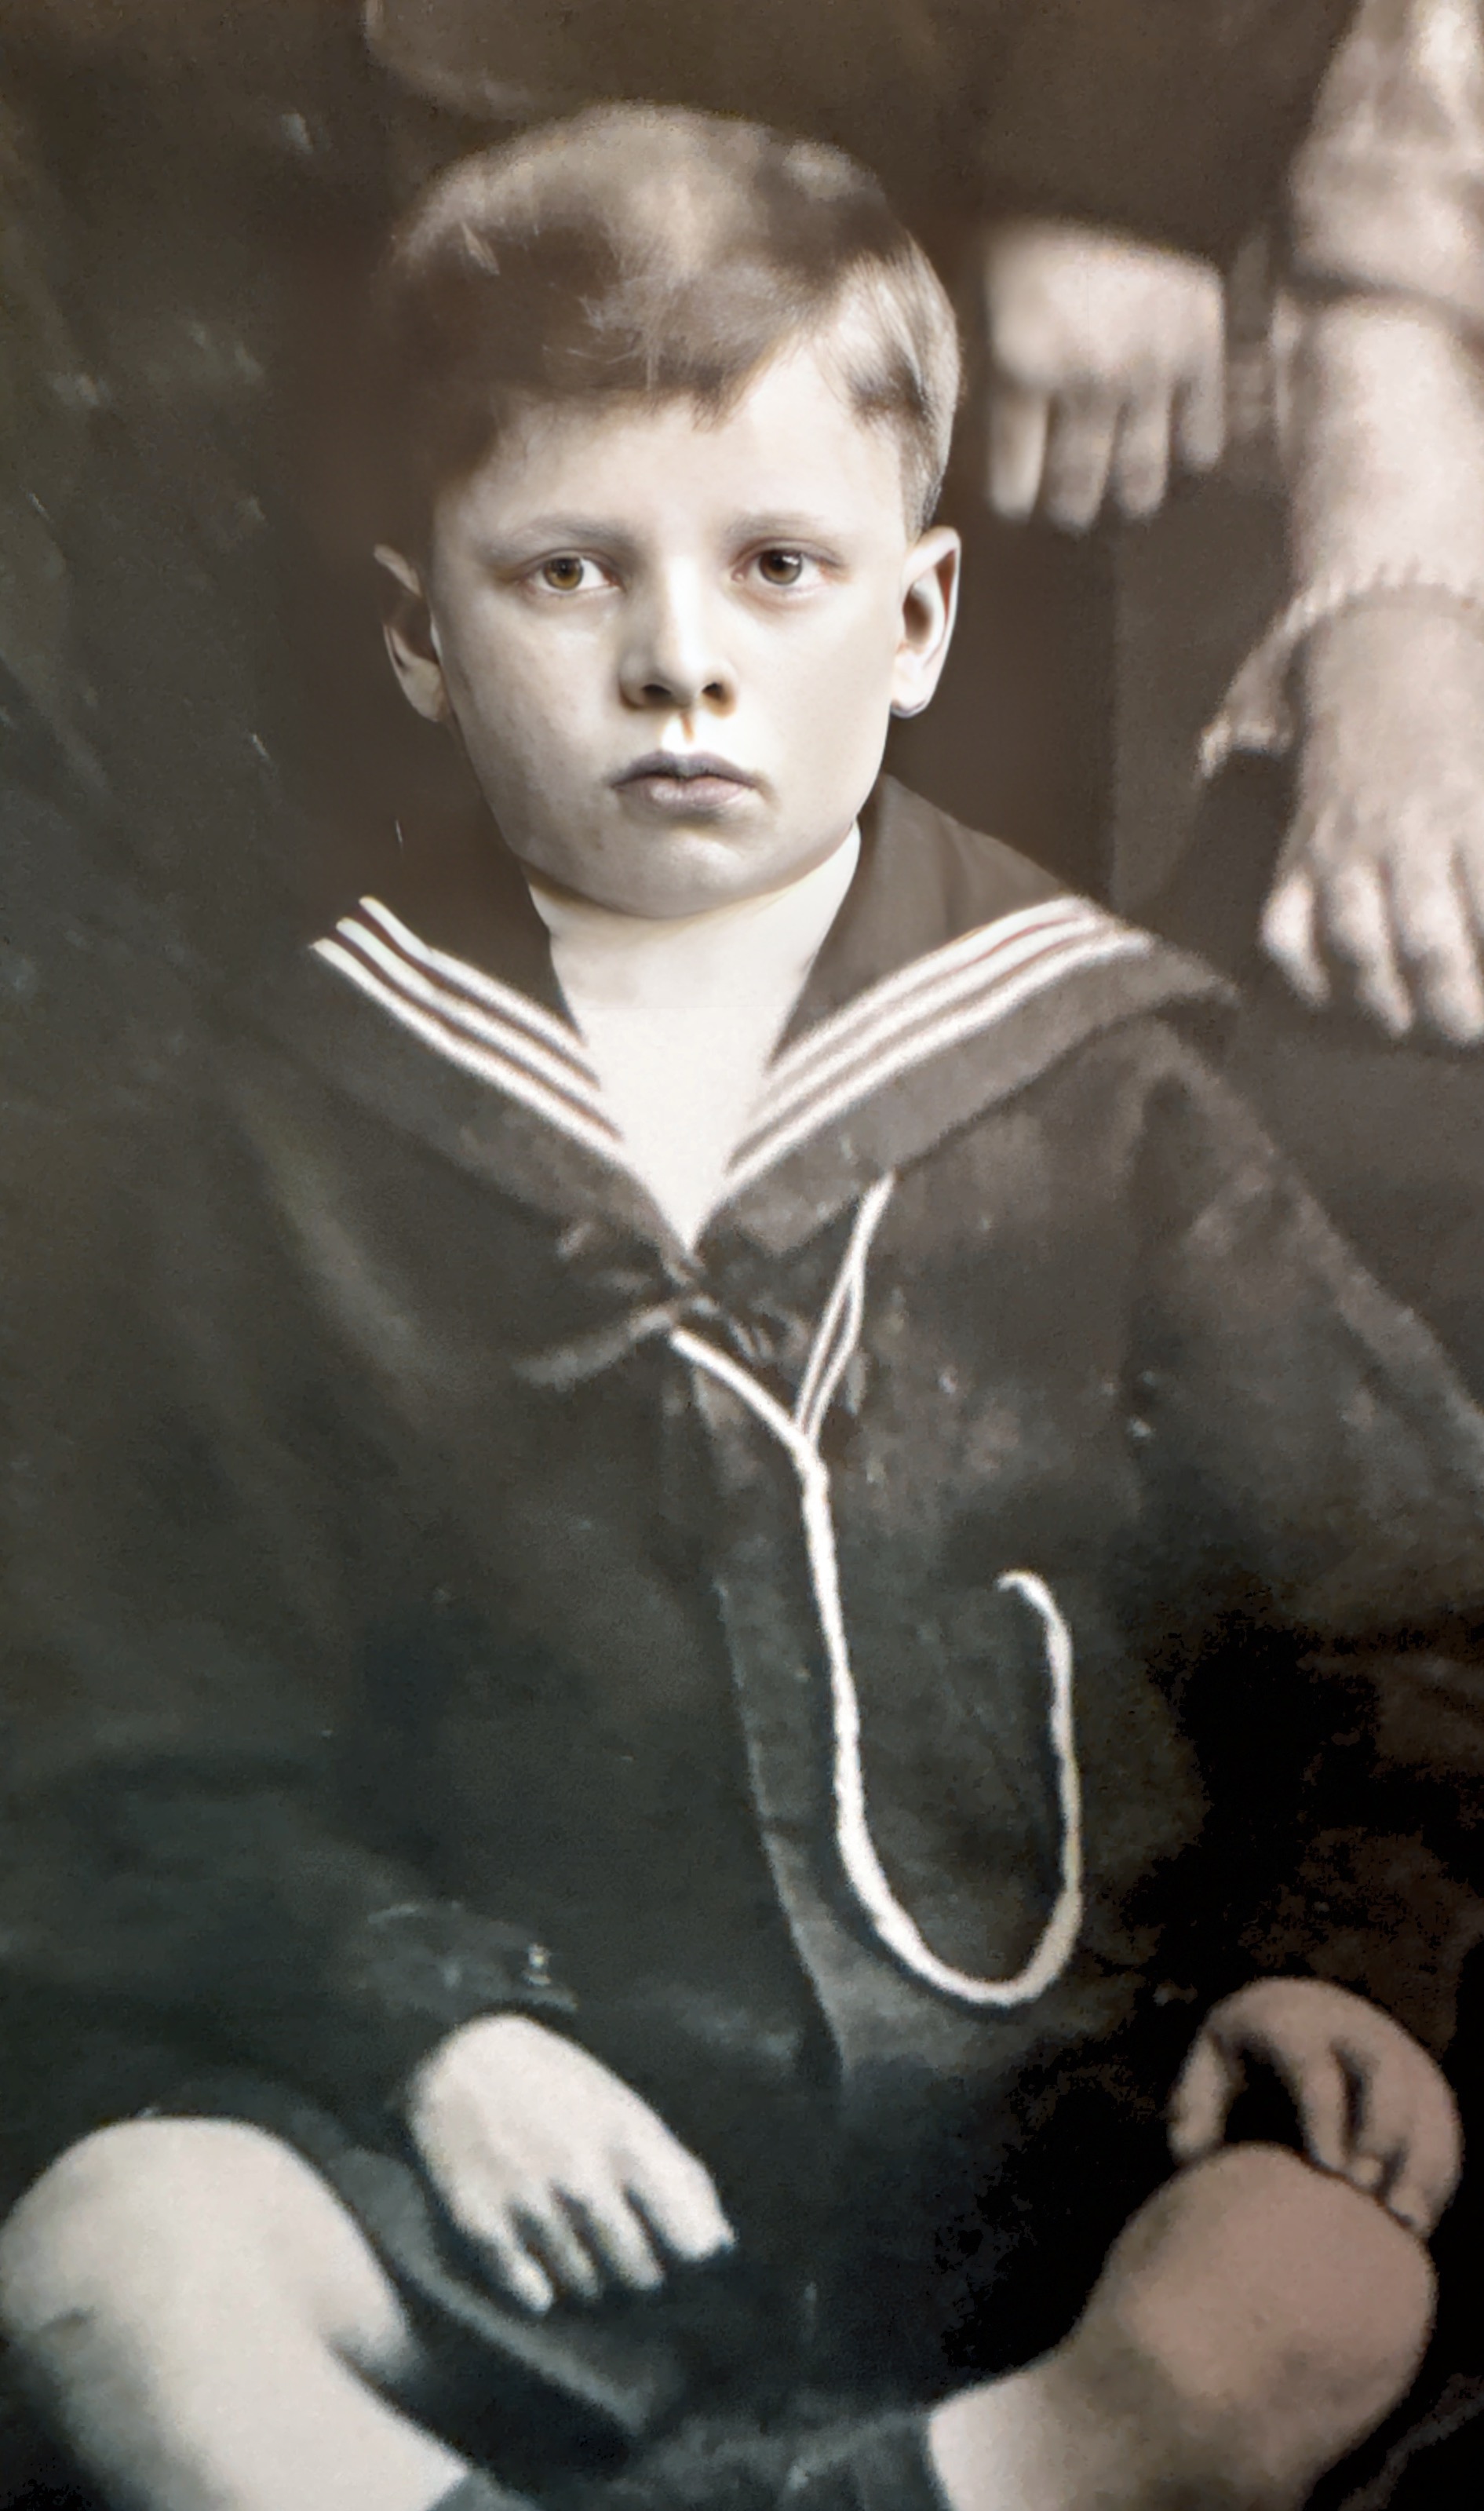 Taken in 1922/23 my Dad when he was 6 yrs old